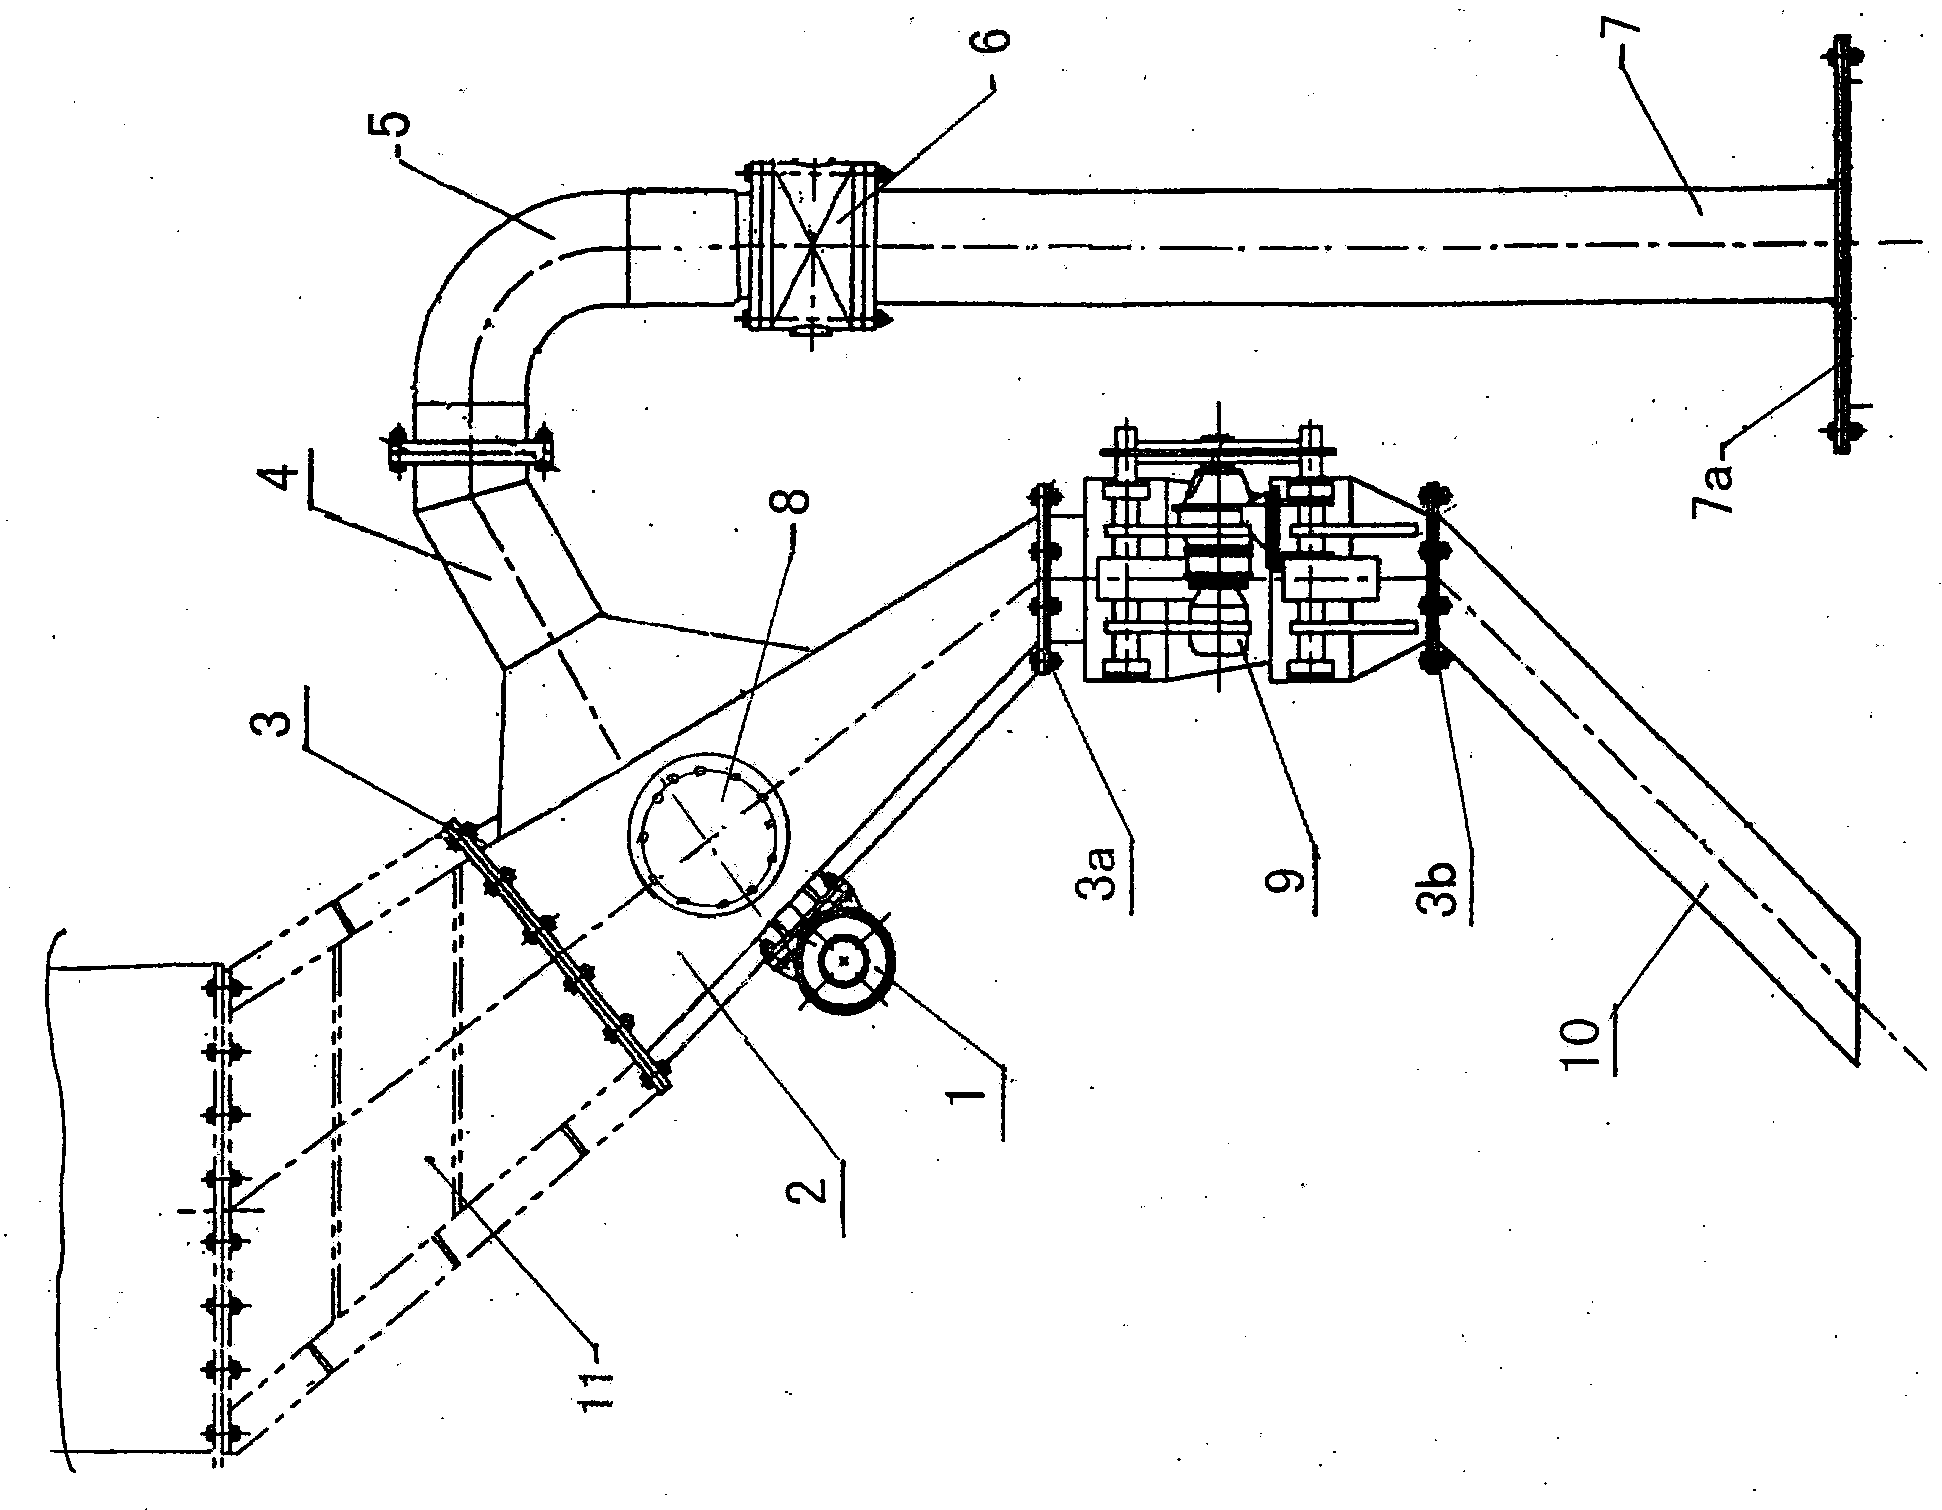 Negative micropressure ignition system for sintering machine bellows